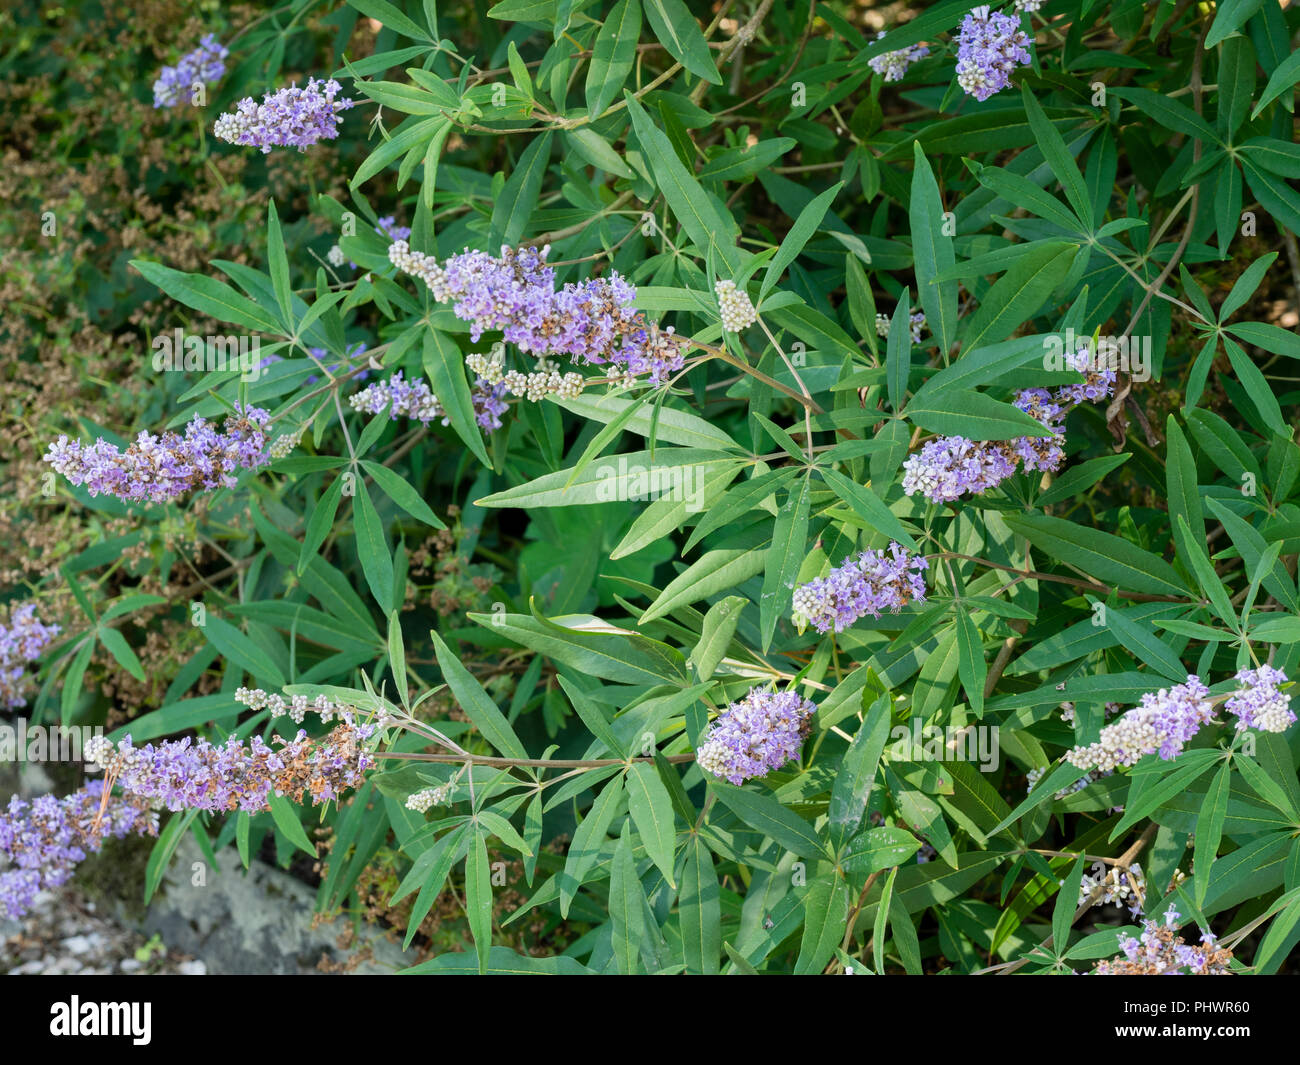 Late summer panicles of blue flowers among the aromatic foliage of the chaste tree, Vitex agnus-castus Stock Photo